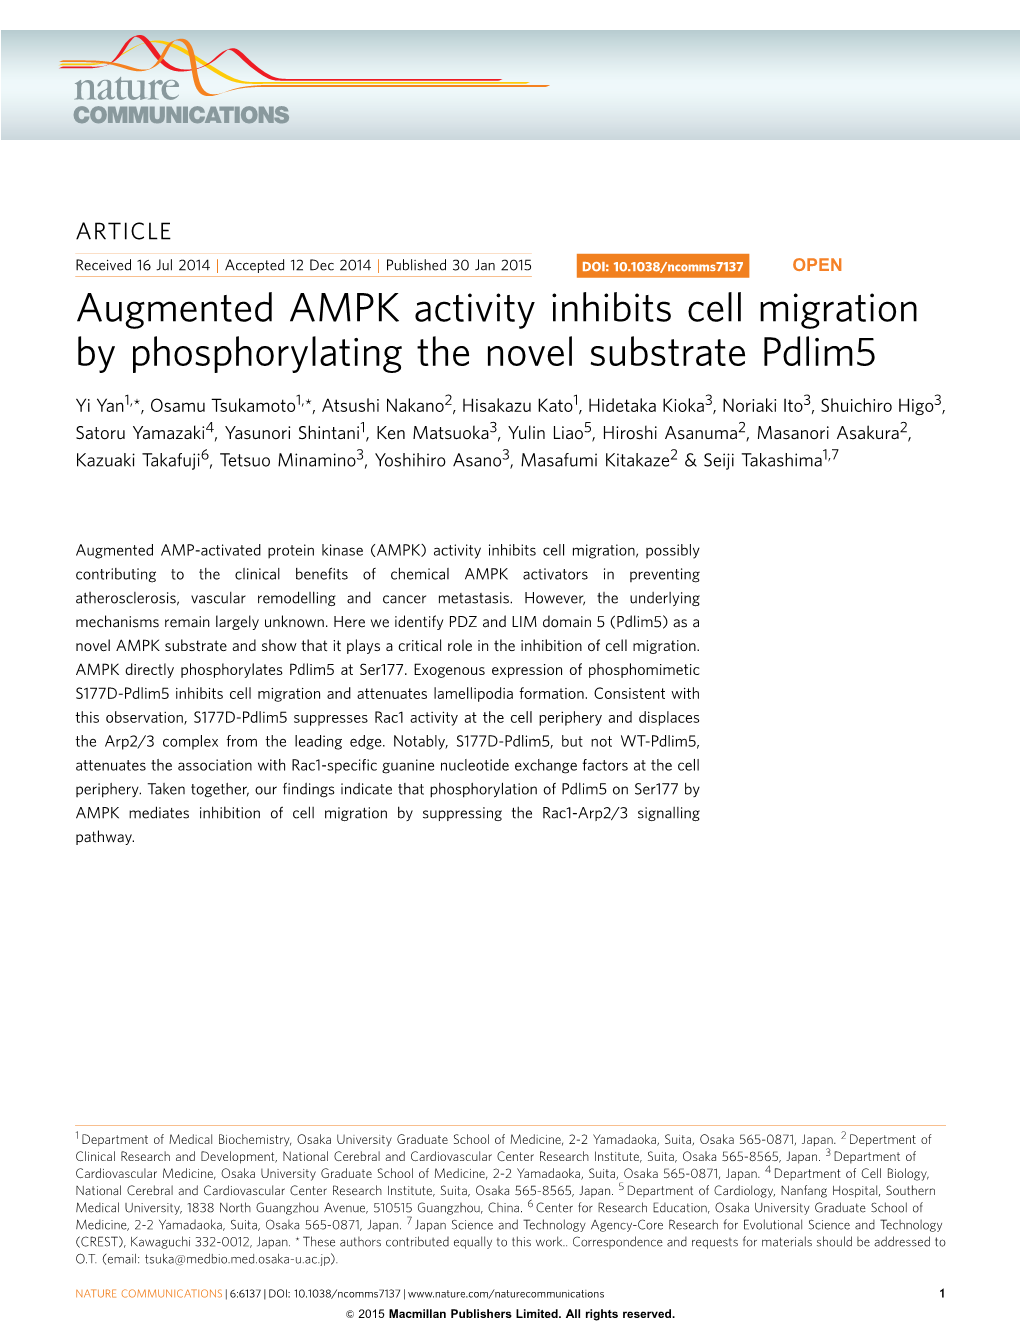 Augmented AMPK Activity Inhibits Cell Migration by Phosphorylating the Novel Substrate Pdlim5